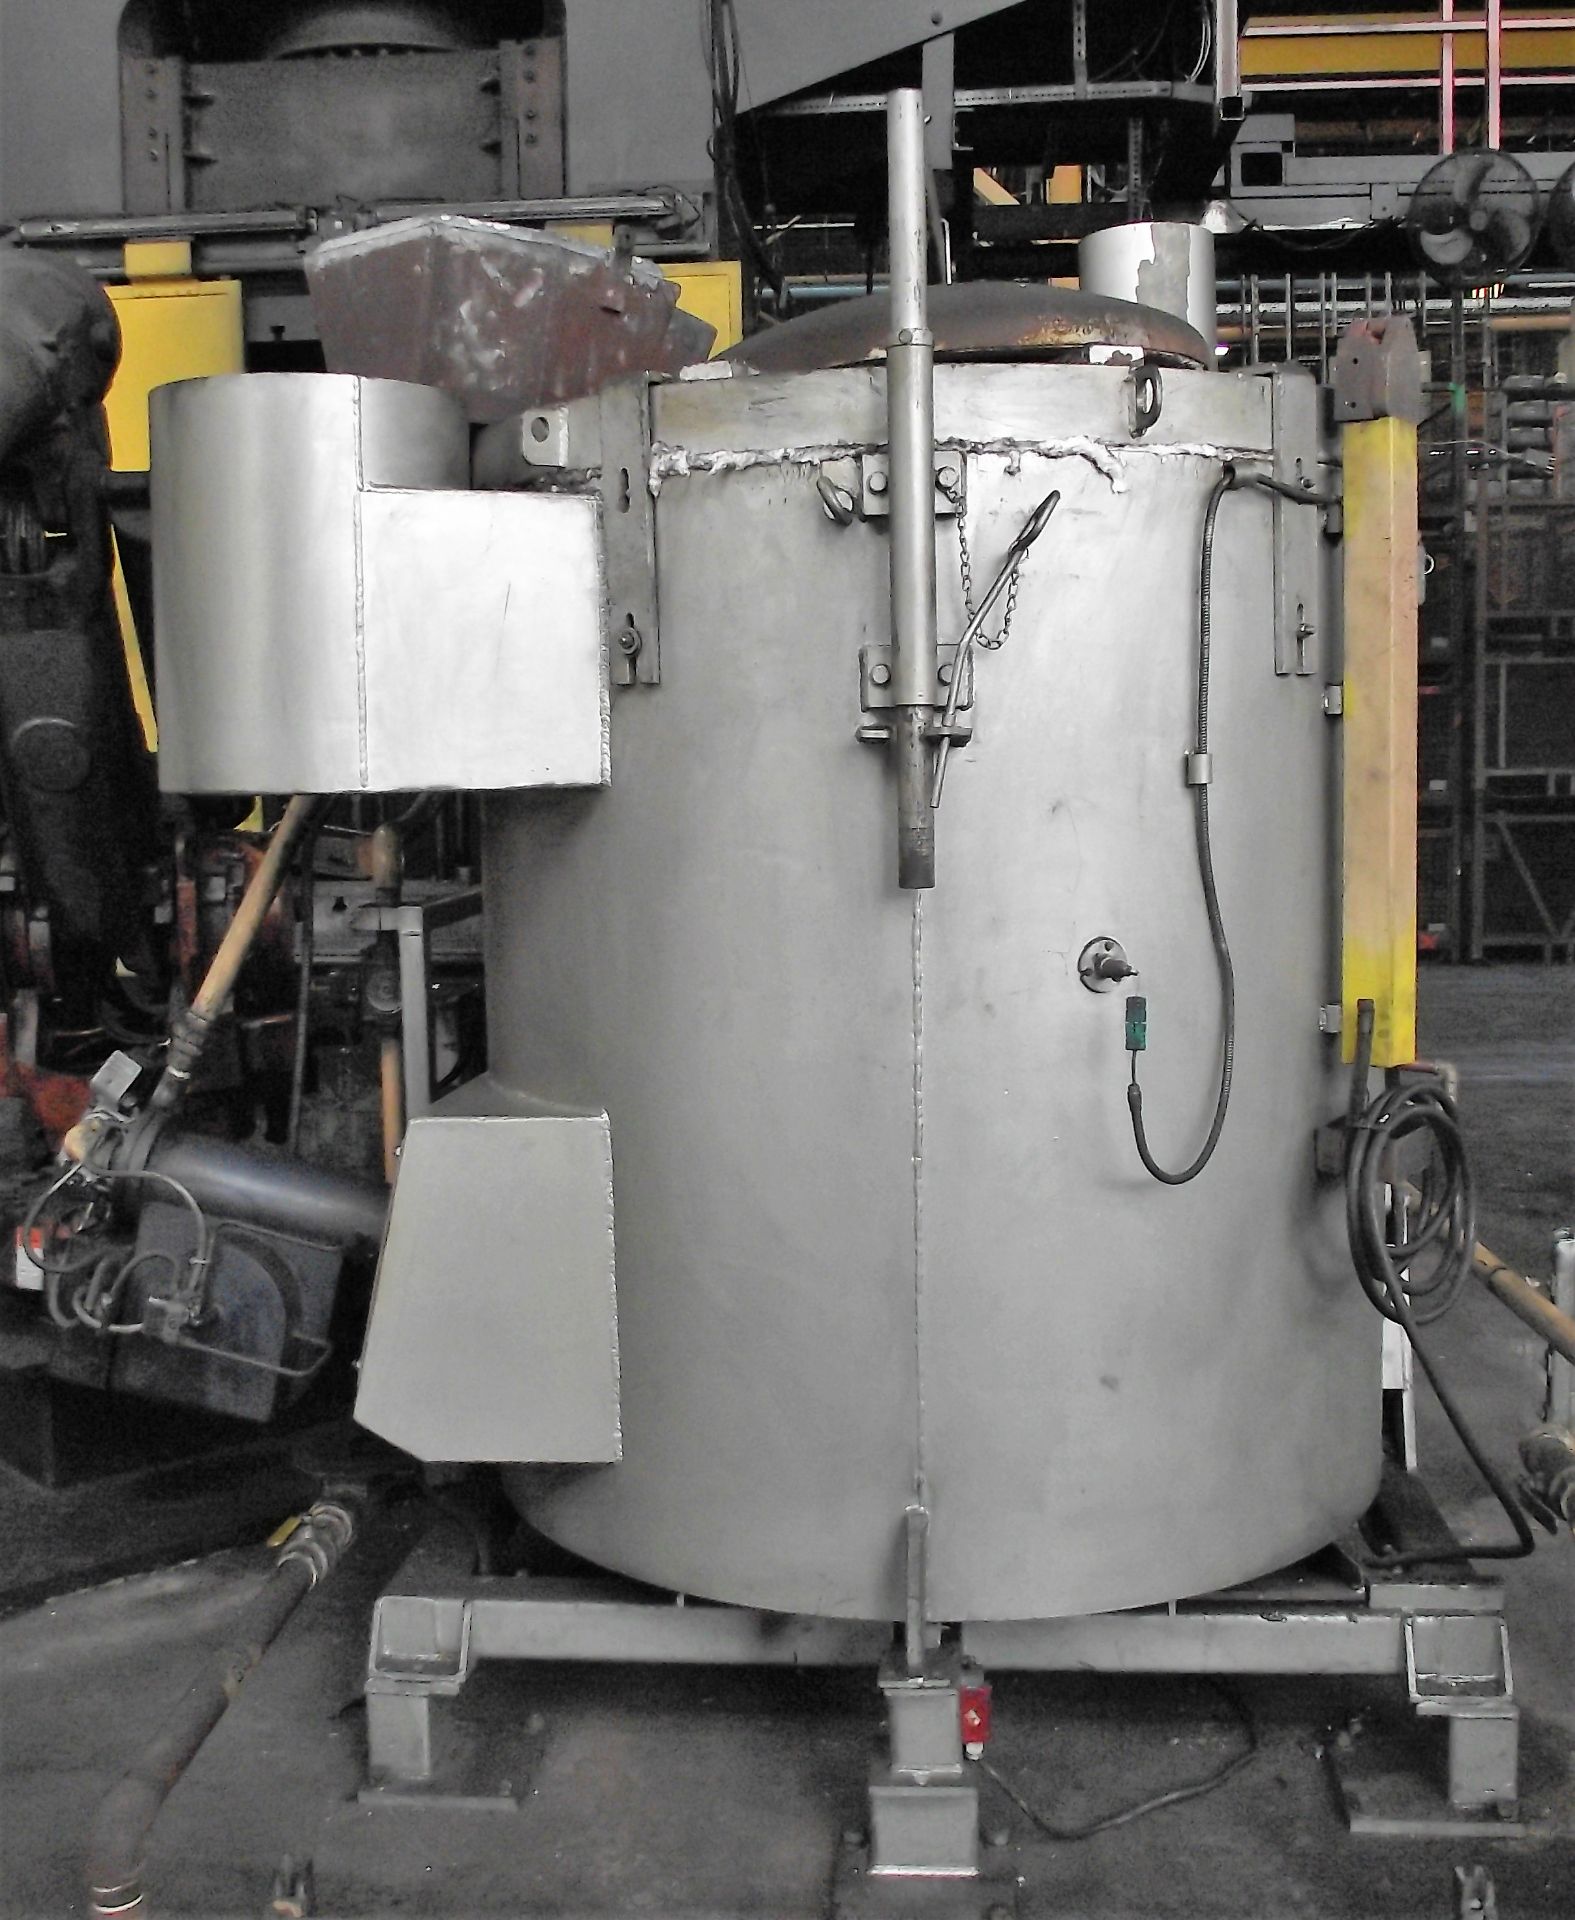 Ramsell-Naber – Gas Fired LA2200 Lip Axis Tilting Furnace - Image 10 of 16